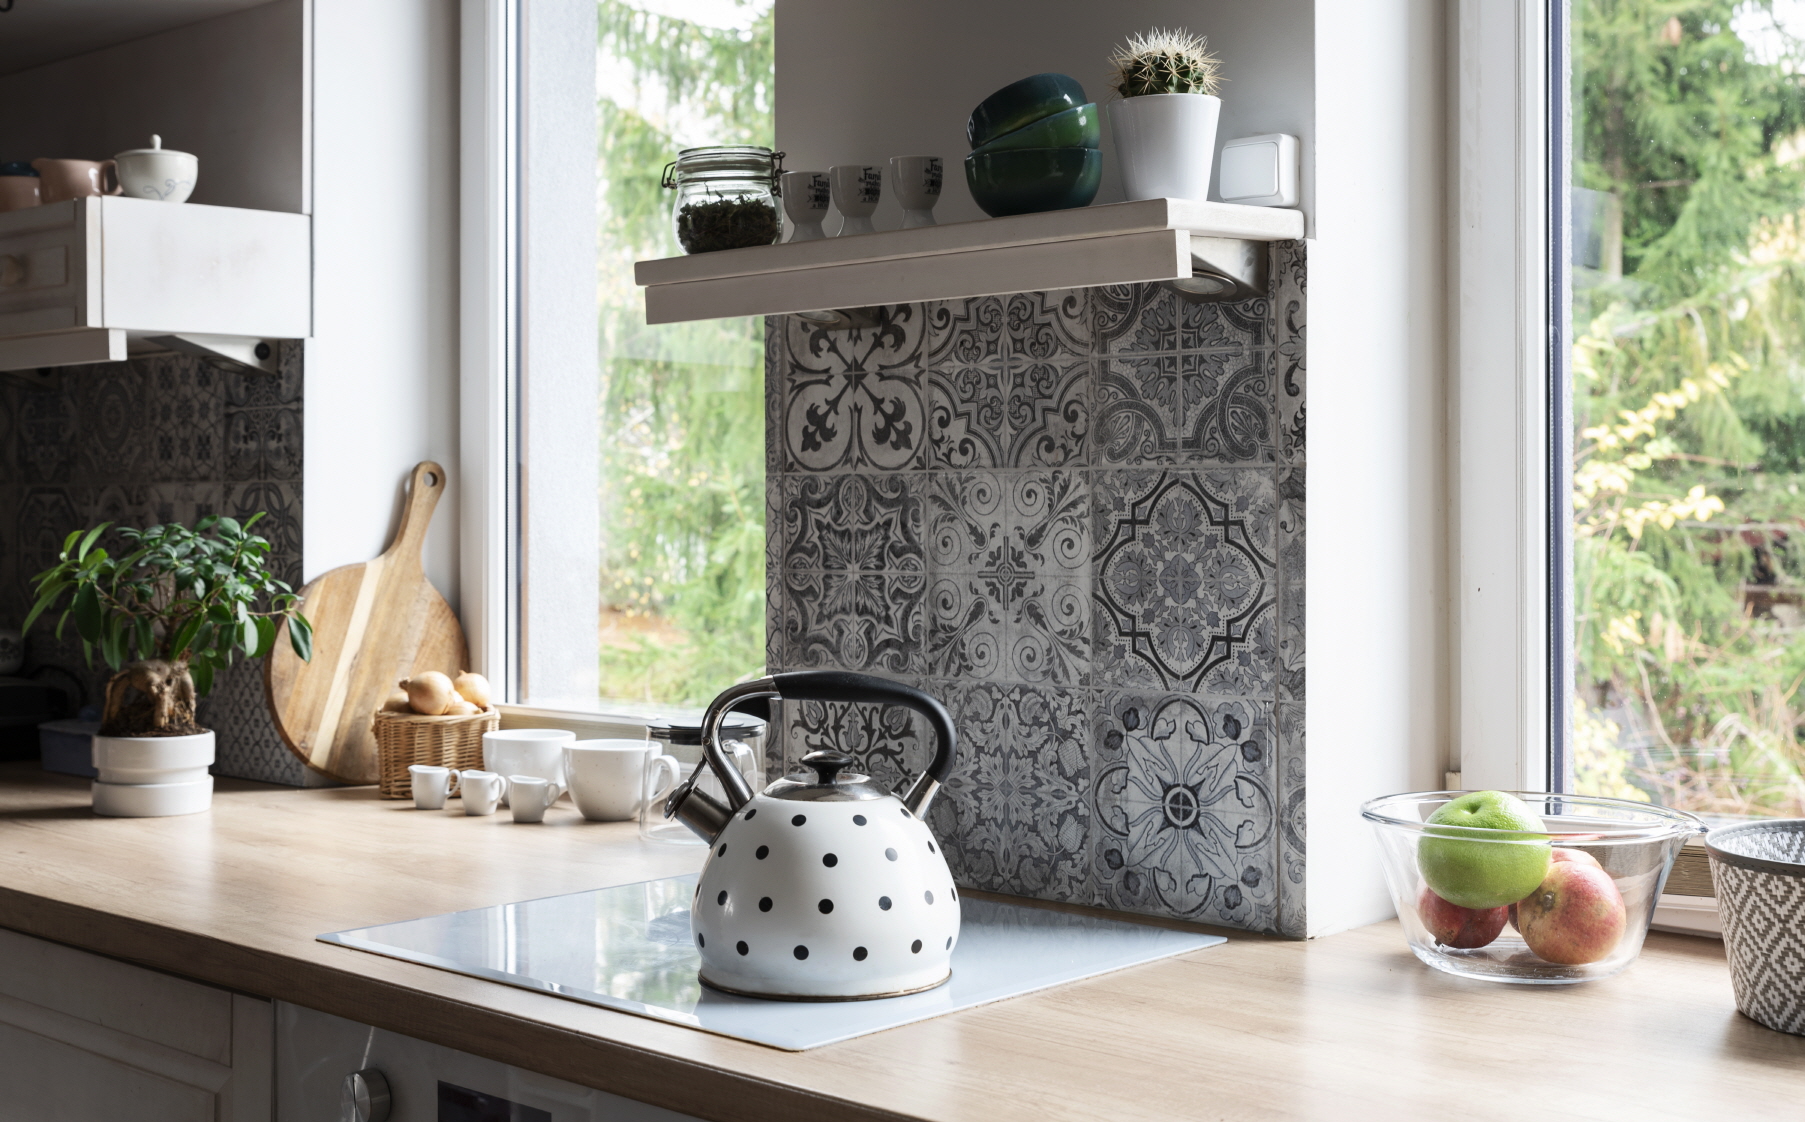 LX Hausys surfaces bring timeless elegance, mimicking classic stone or marble for a nostalgic touch in your kitchen.